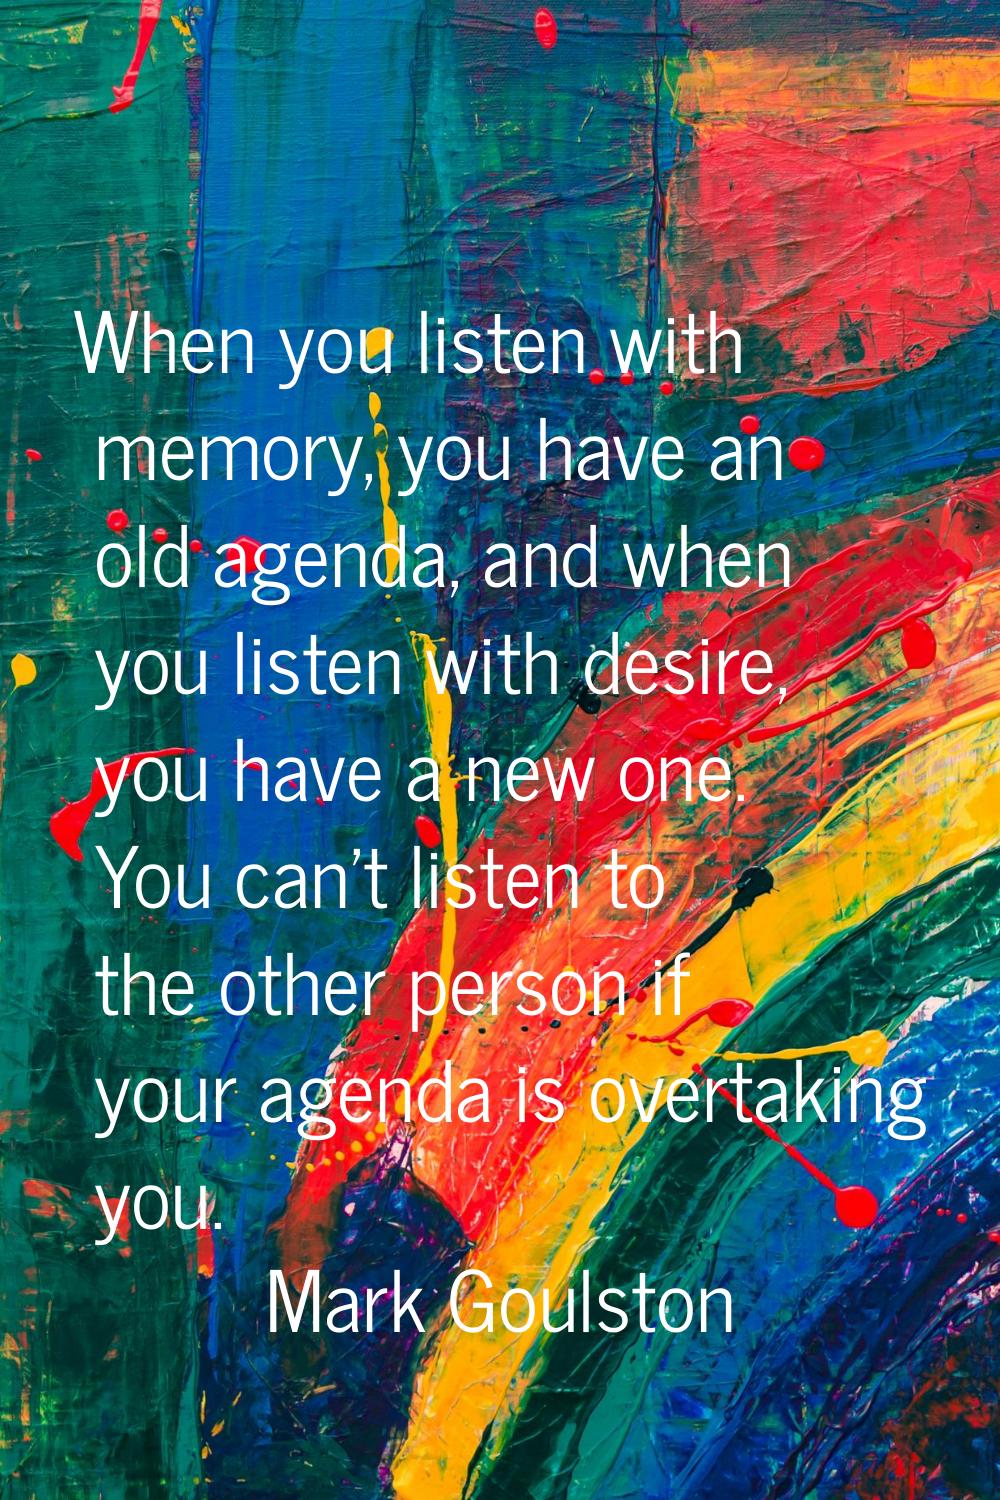 When you listen with memory, you have an old agenda, and when you listen with desire, you have a ne